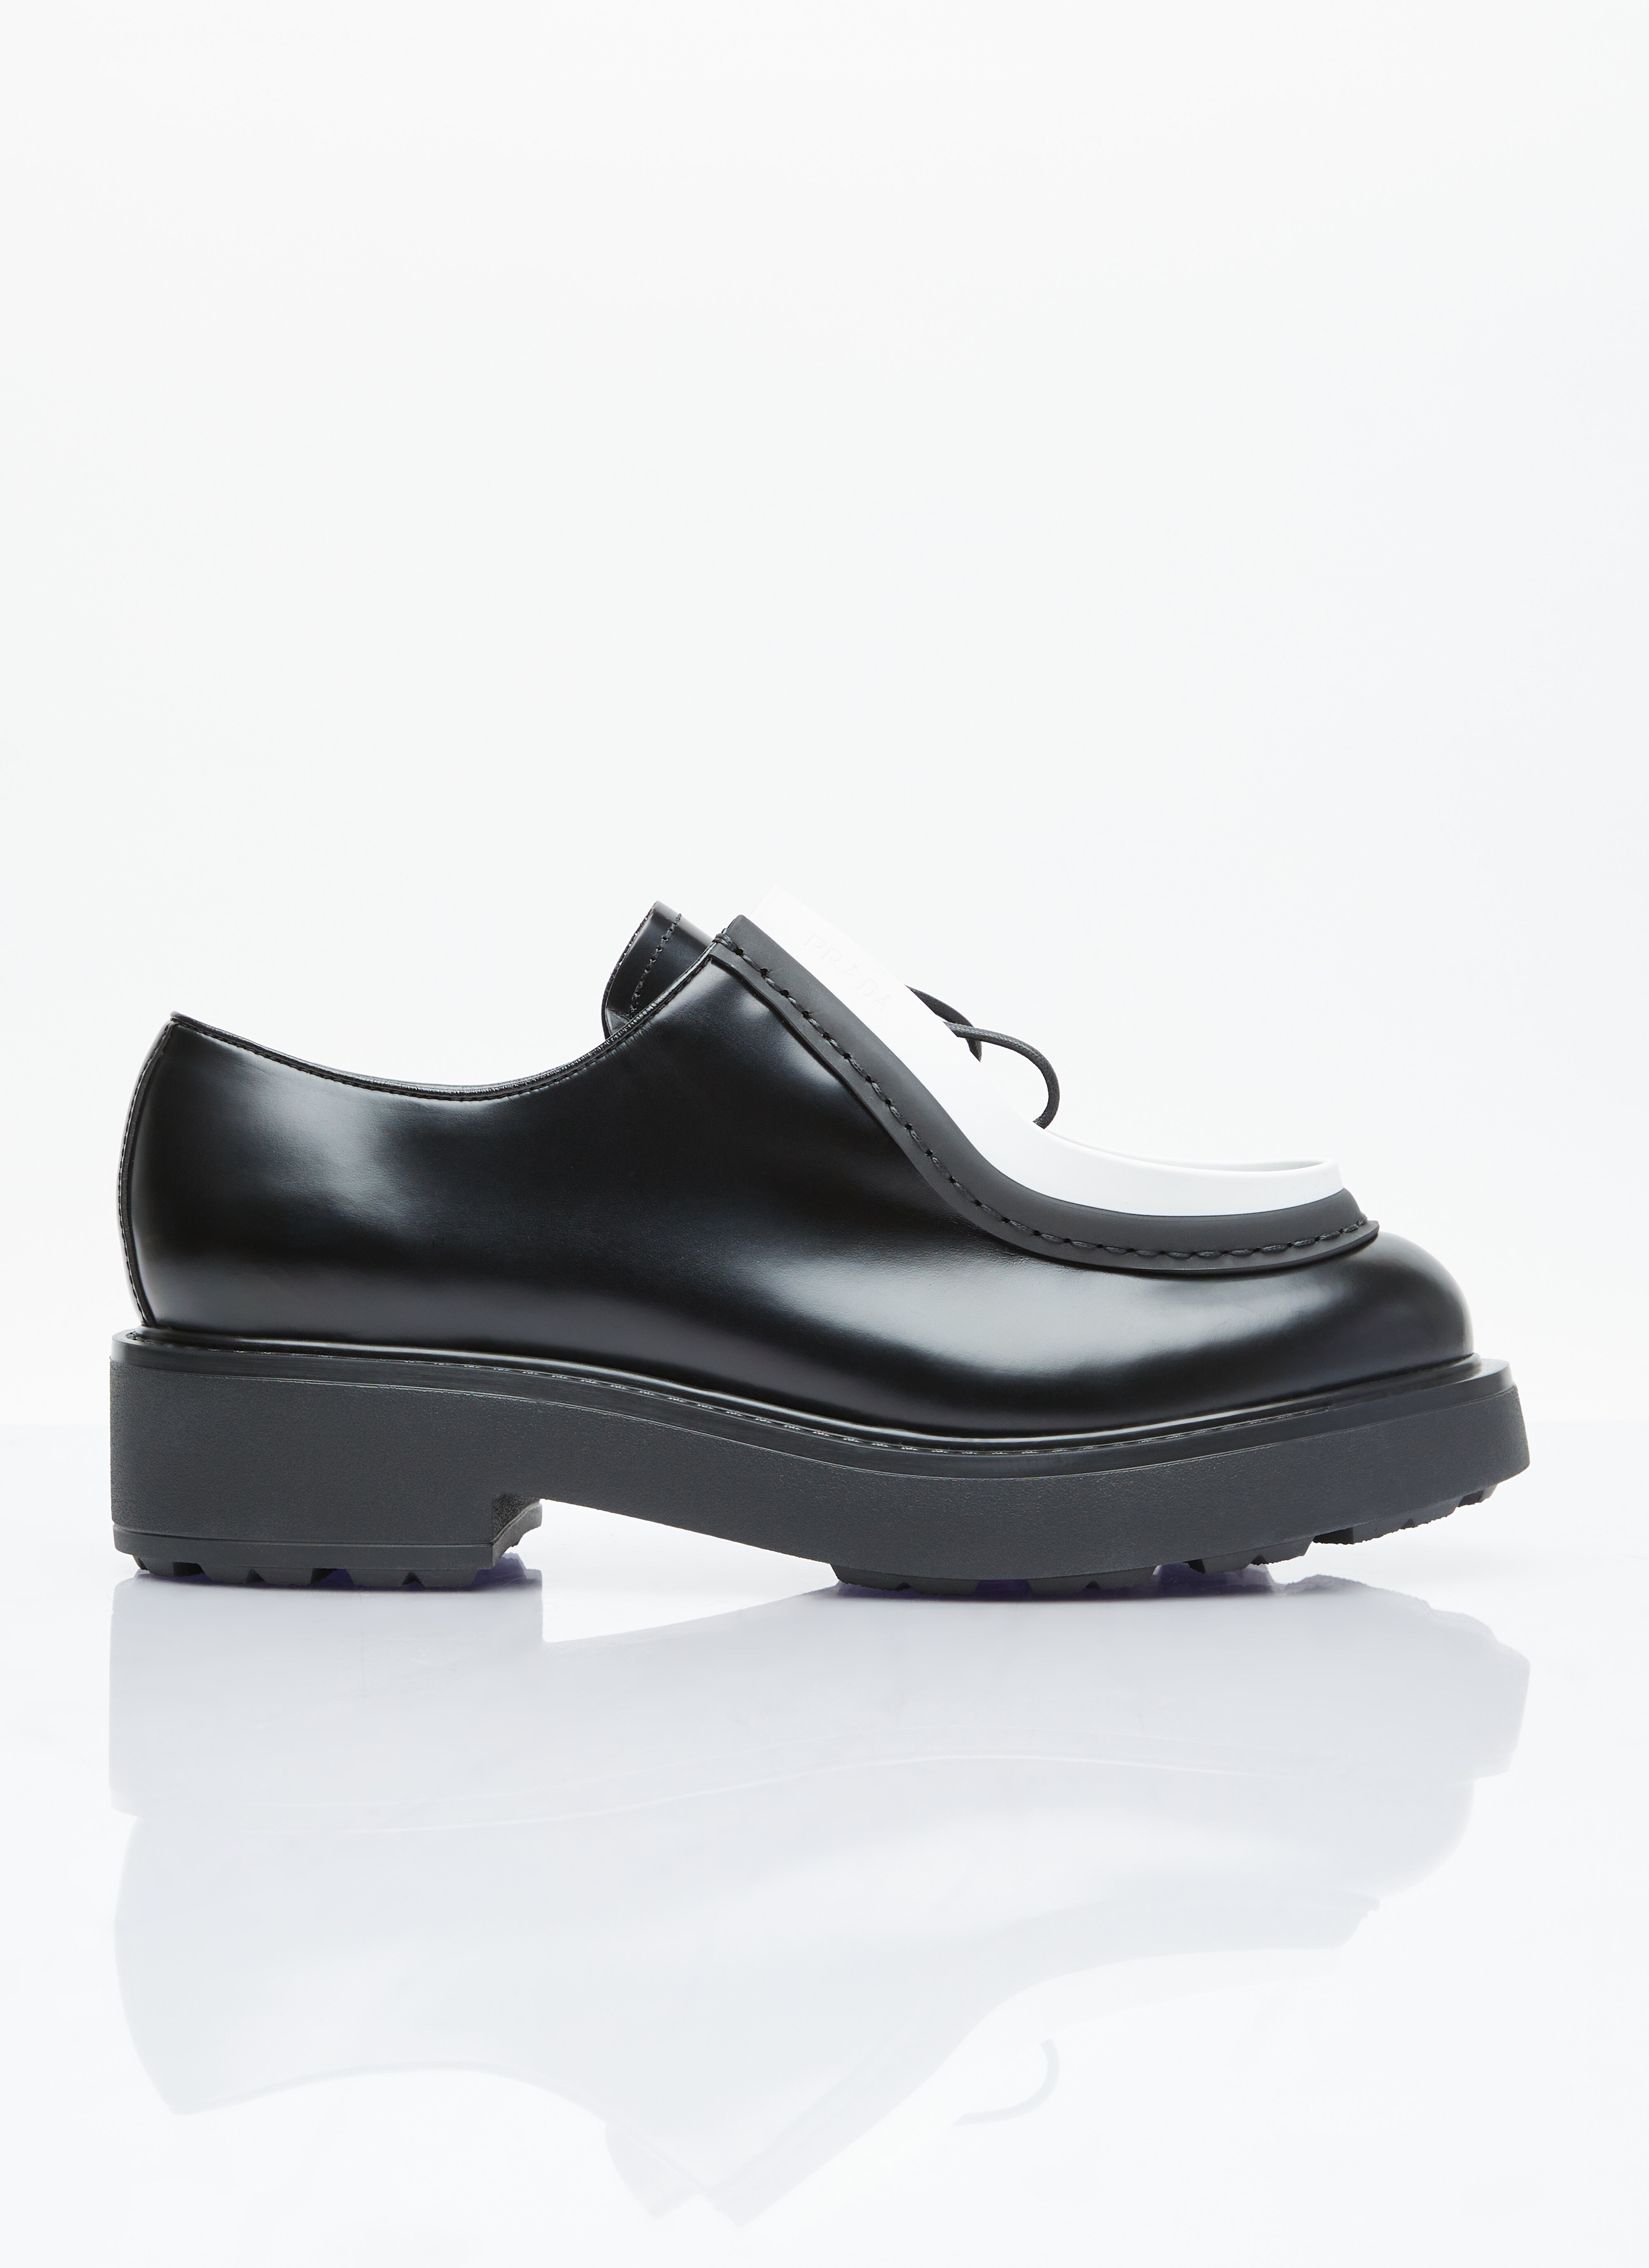 Vivienne Westwood Brushed Leather Lace-Up Shoes ブラック vvw0255059